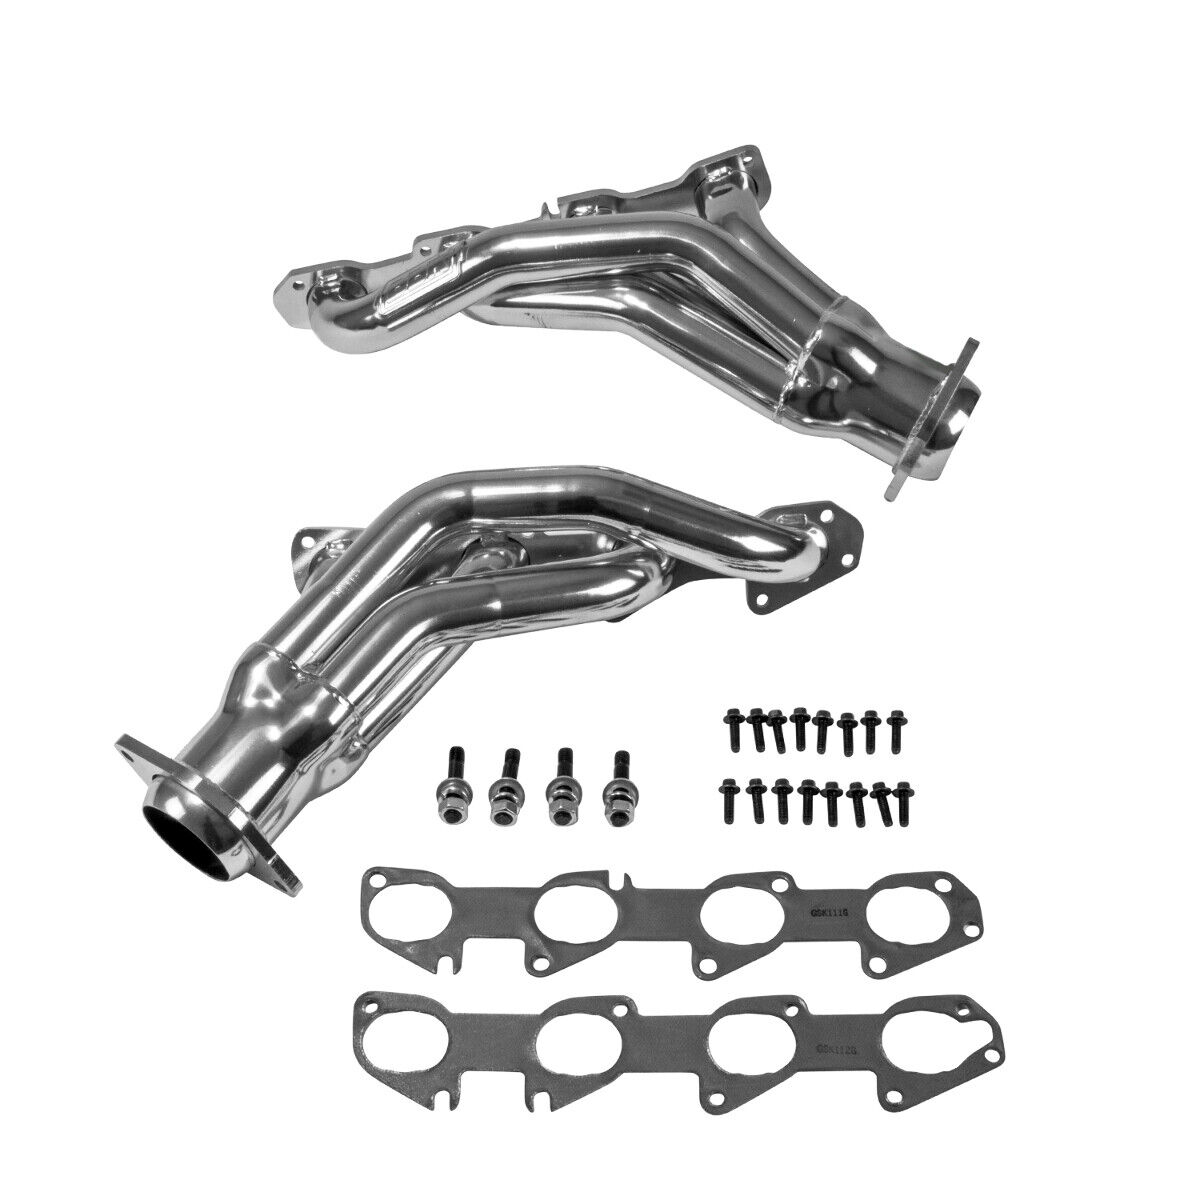 Fits 2006-2010 Dodge Challenger Charger 6.1L 1-7/8 Shorty Exhaust Headers-40130